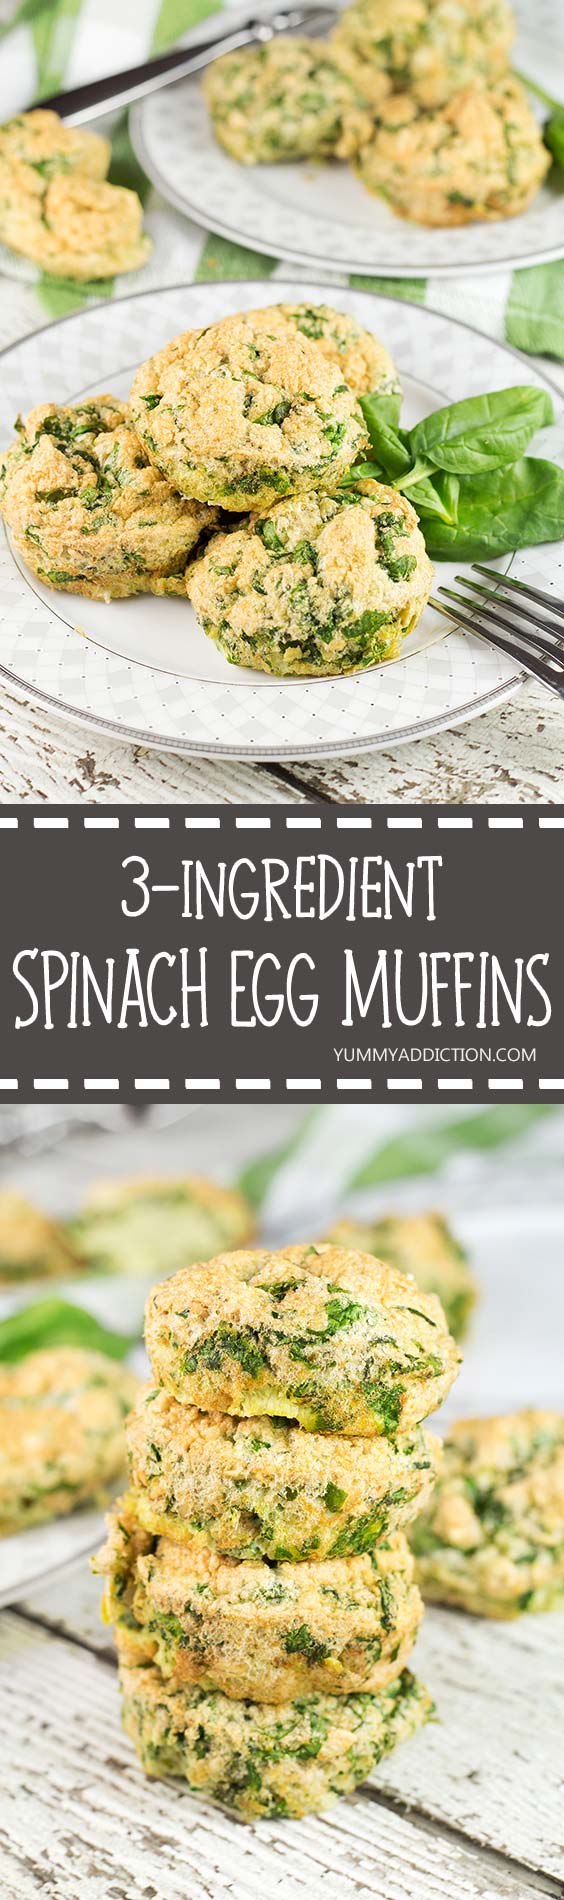 These Spinach Egg Muffins require only 3 ingredients to make + 5 minutes of your time to prepare! Perfect as a make-ahead breakfast or as a snack! | yummyaddiction.com